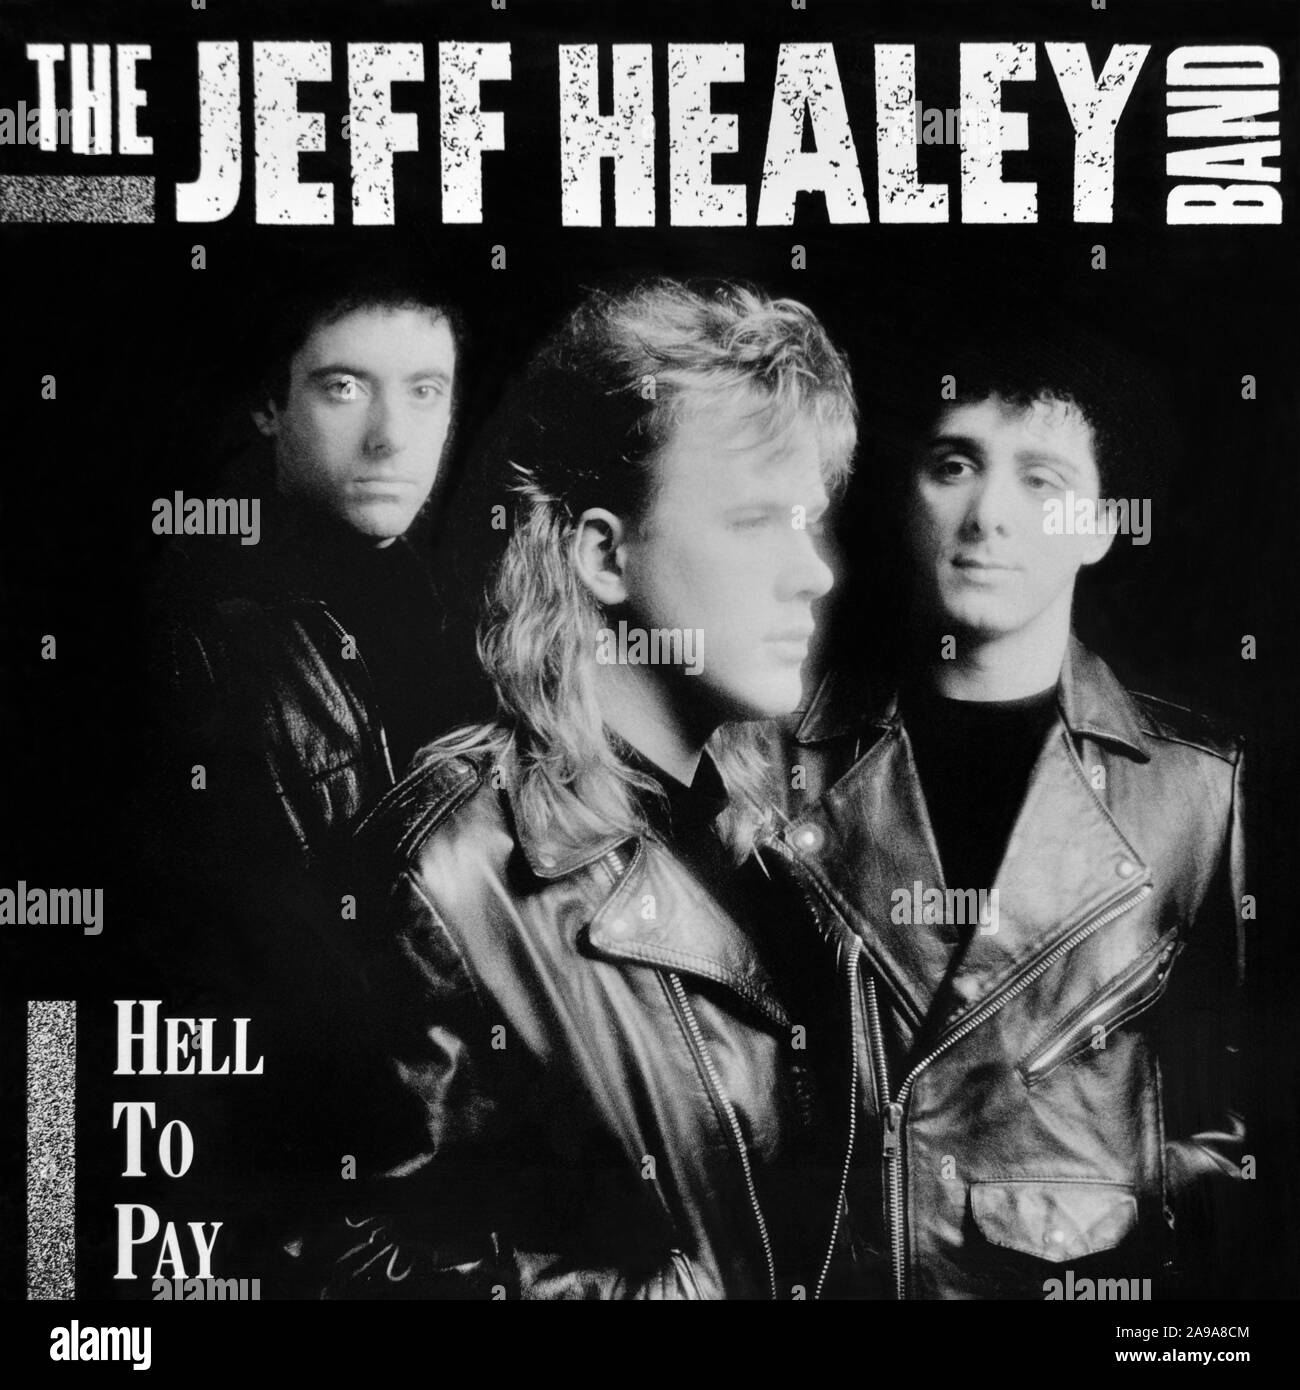 The Jeff Healey Band - copertina originale dell'album in vinile - Hell To Pay - 1990 Foto Stock